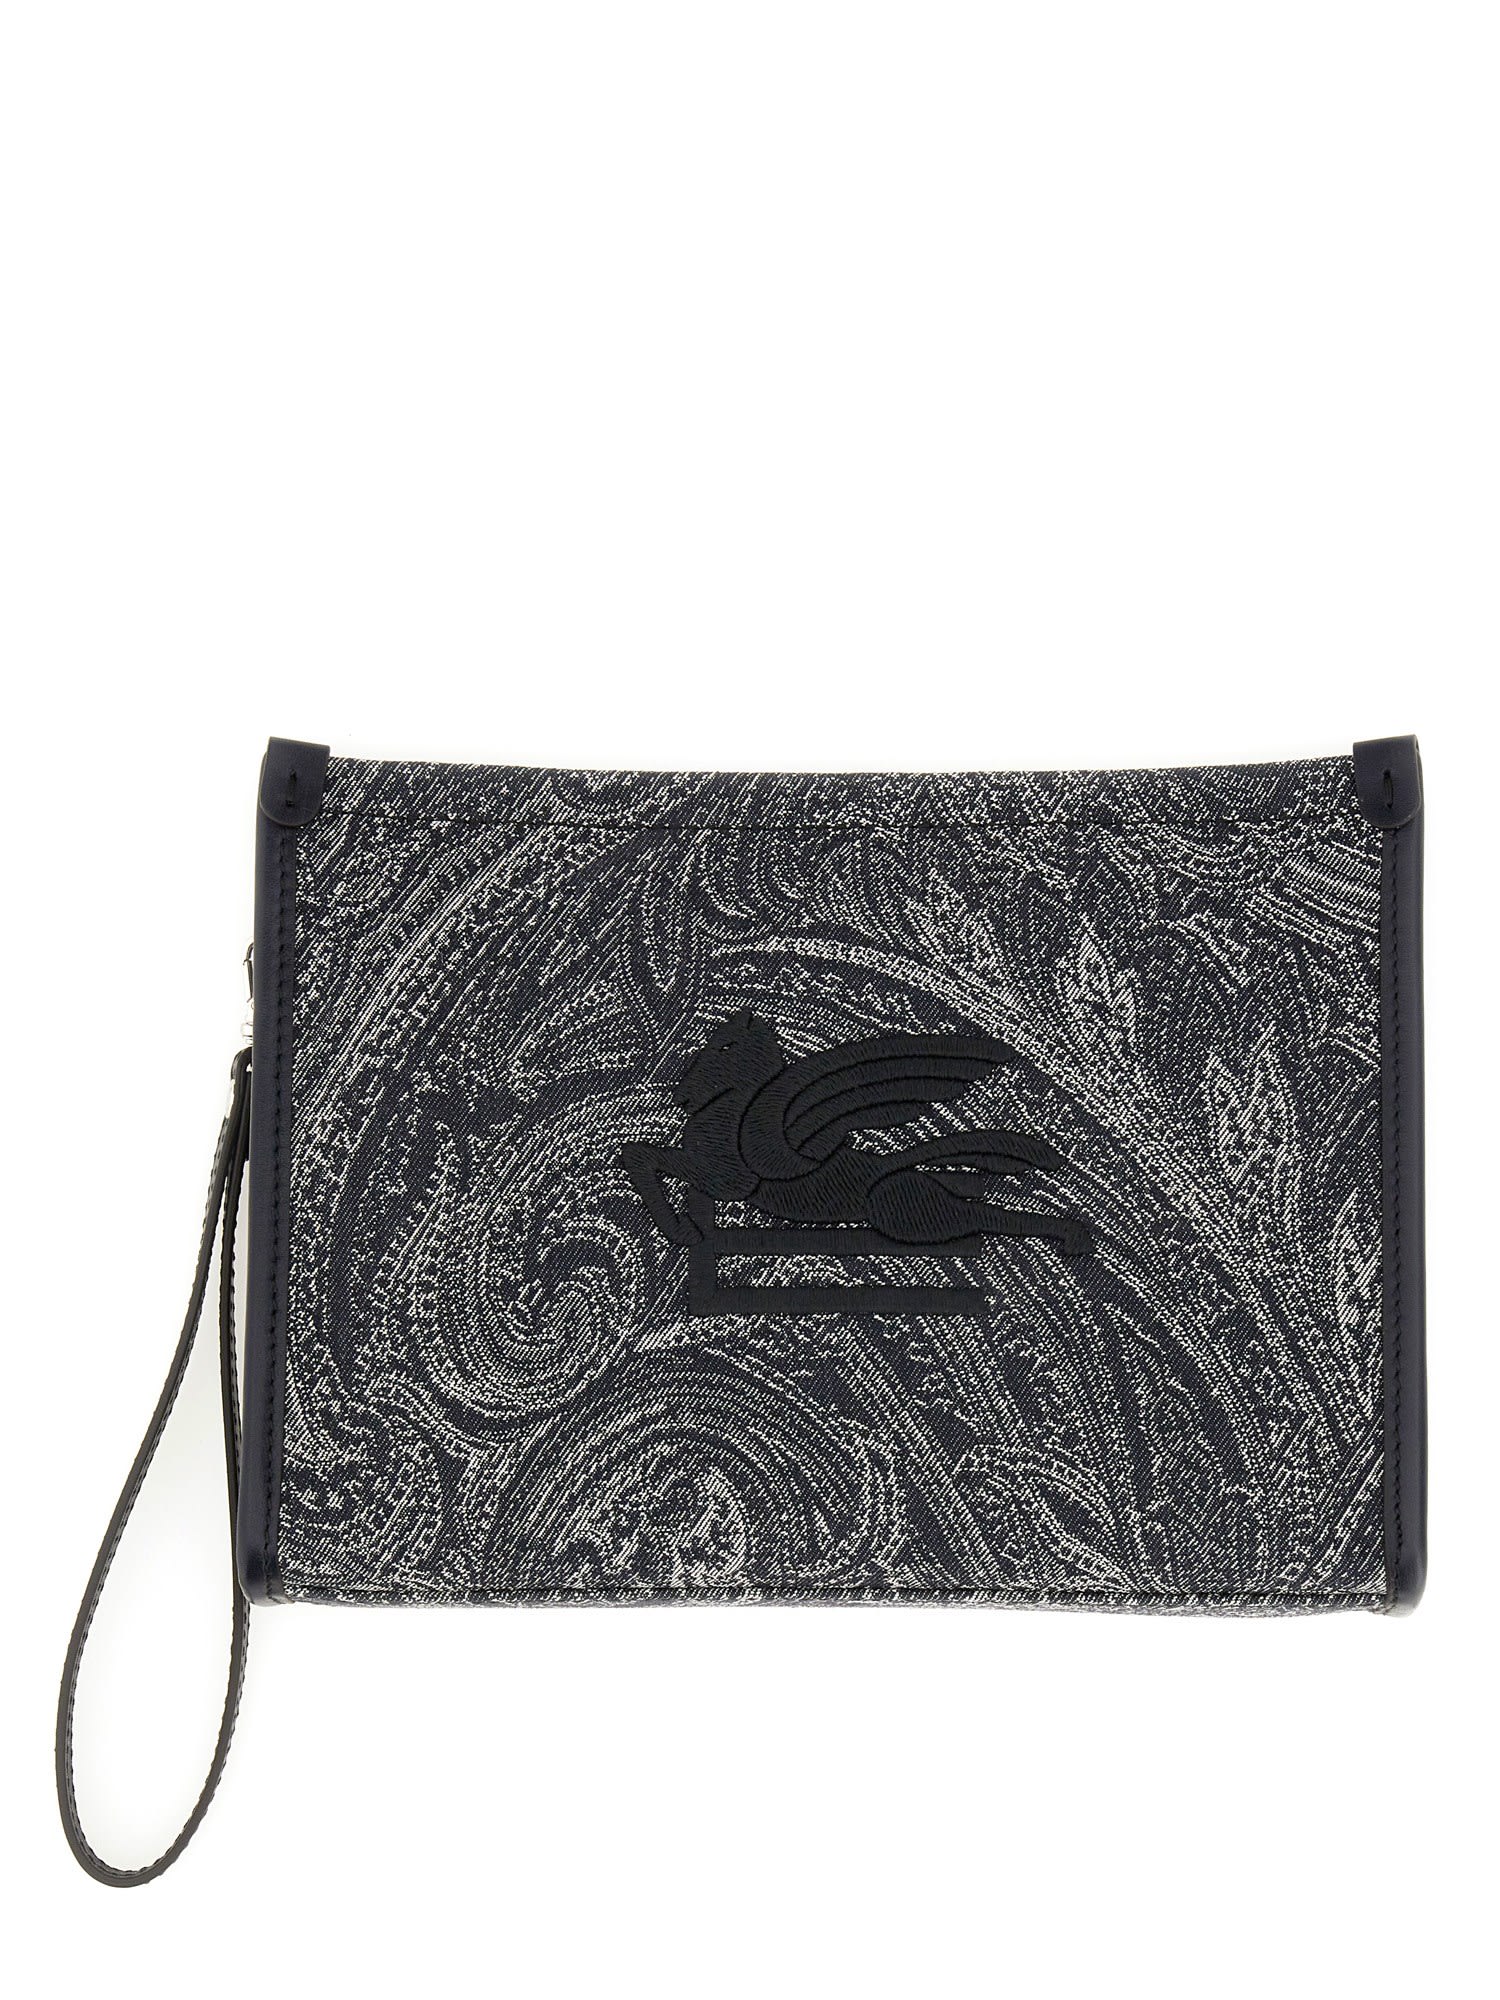 Navy Blue Pouch With Paisley Jacquard Motif